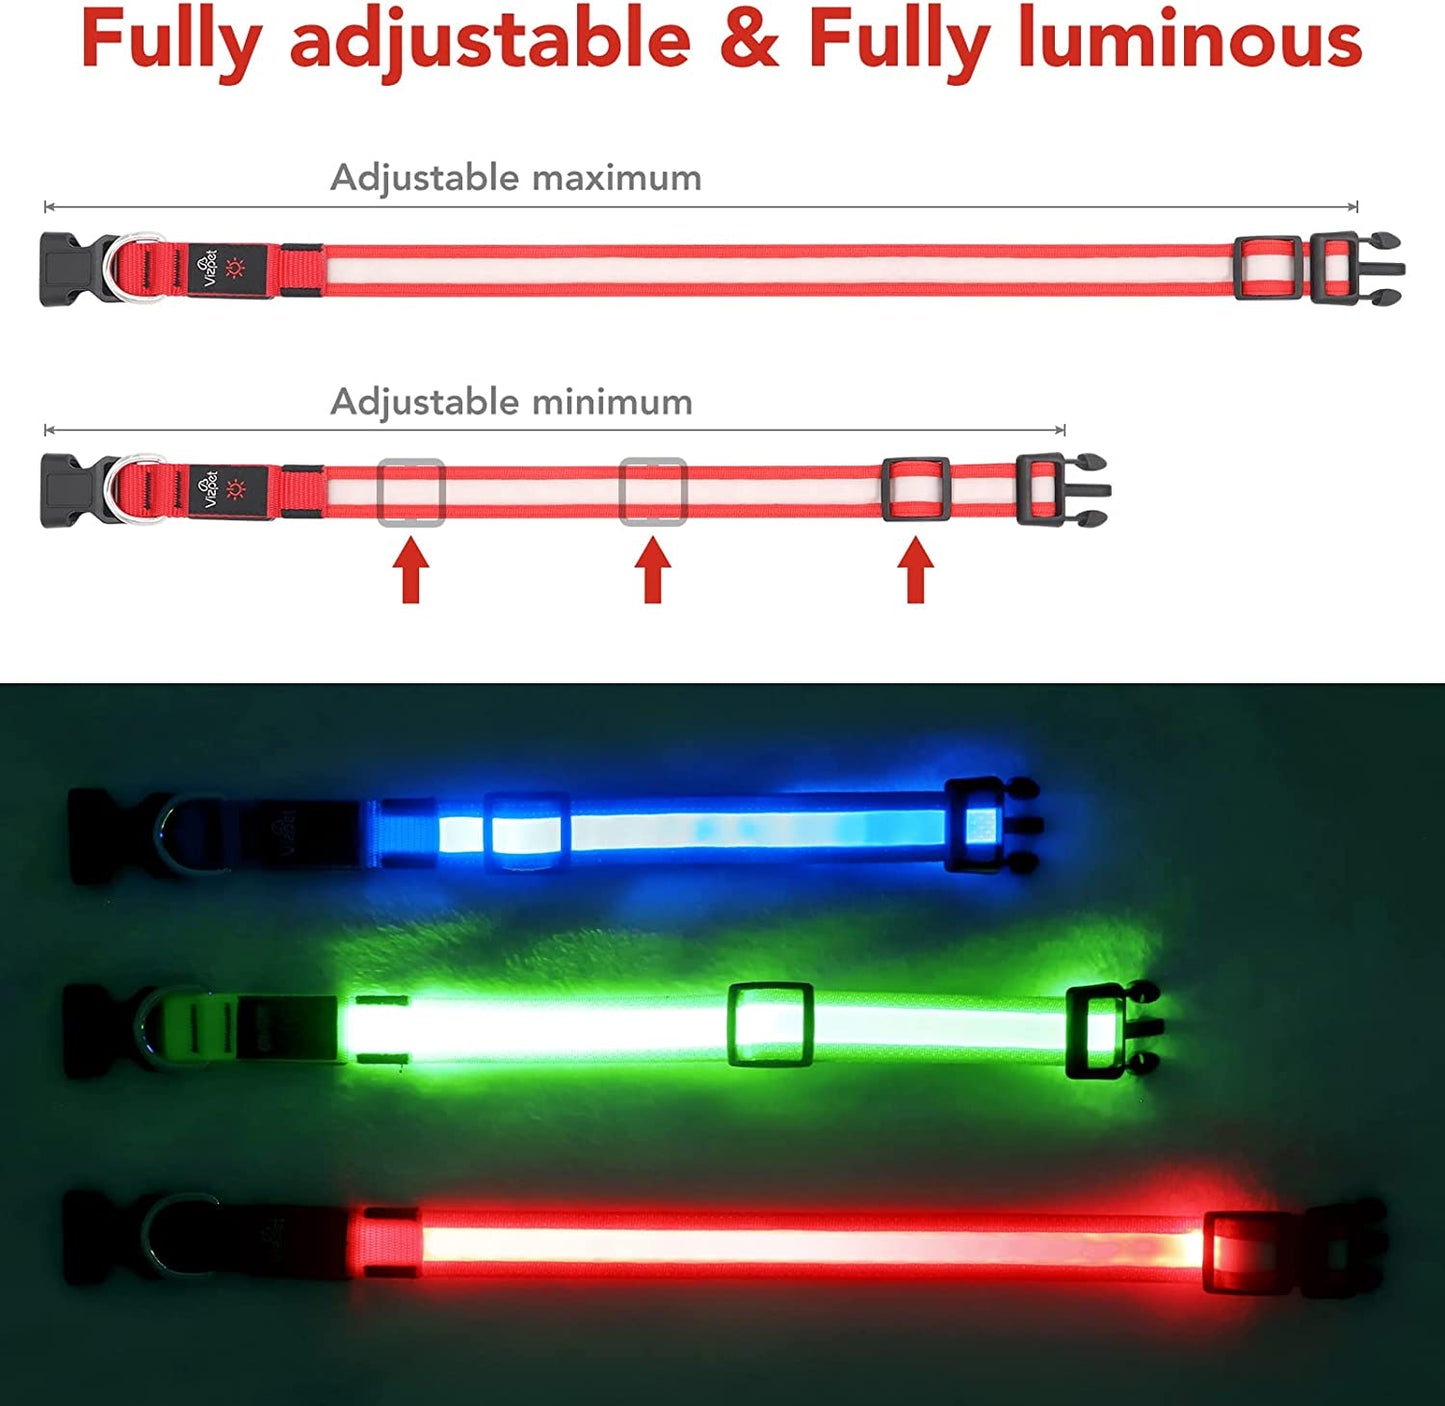 LED Dog Collar, Light up Dog Collar Adjustable USB Rechargeable Super Bright Safety Light Glowing Collars for Dogs